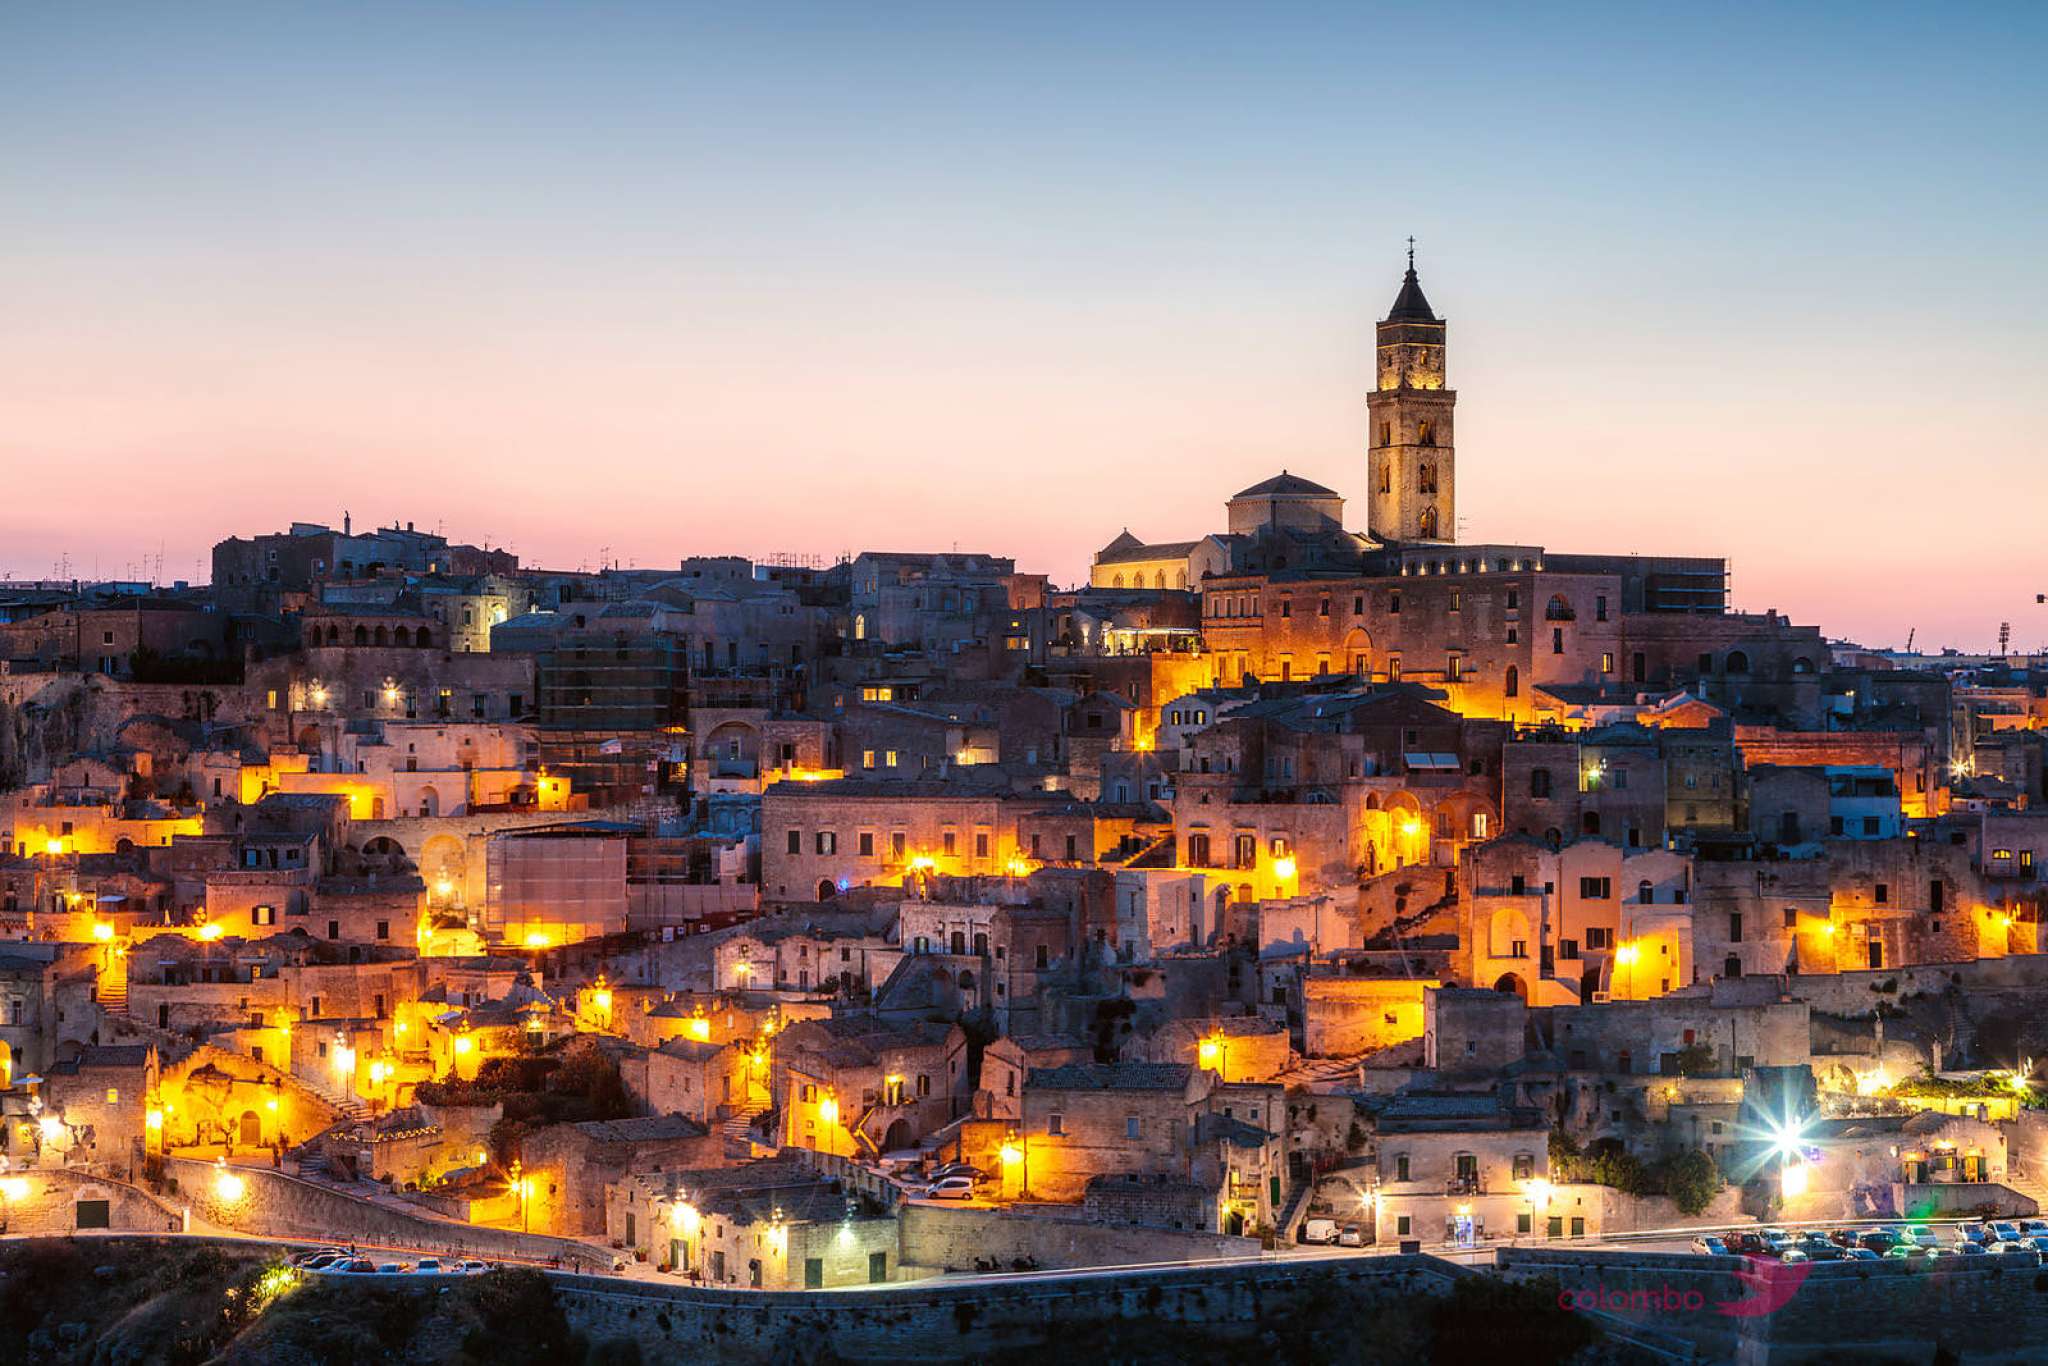 Visit-matera-with-this-exclusive-sybarite-experience,-in-partnership-with-il-palazzotto-residences-and-winery.